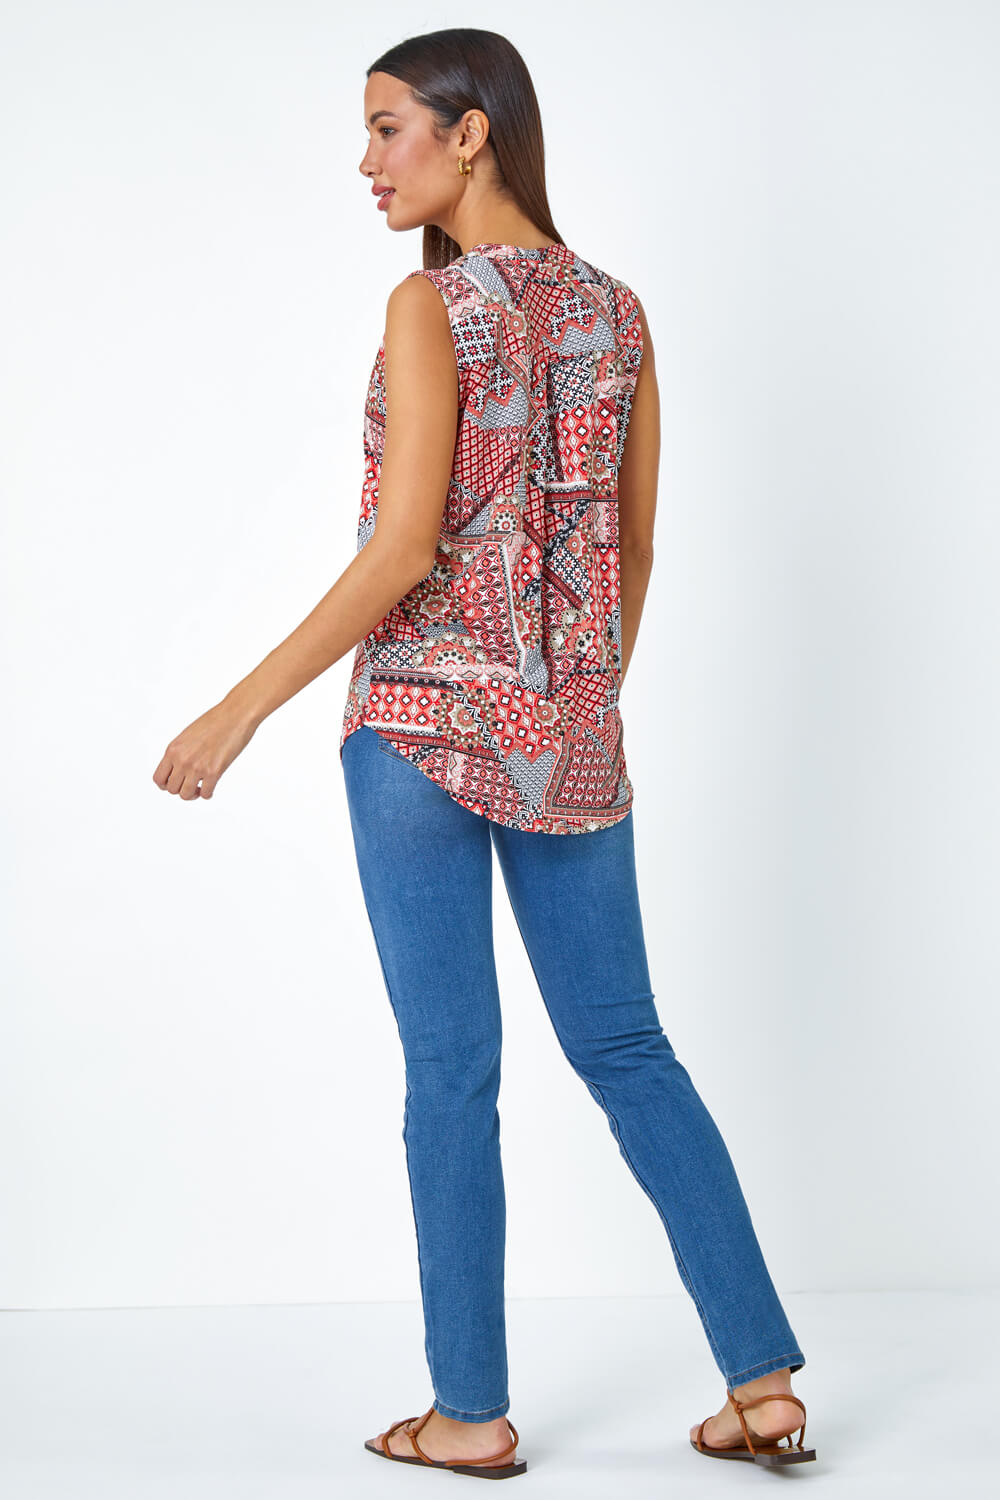 Red Textured Patchwork Sleeveless Stretch Top, Image 3 of 5